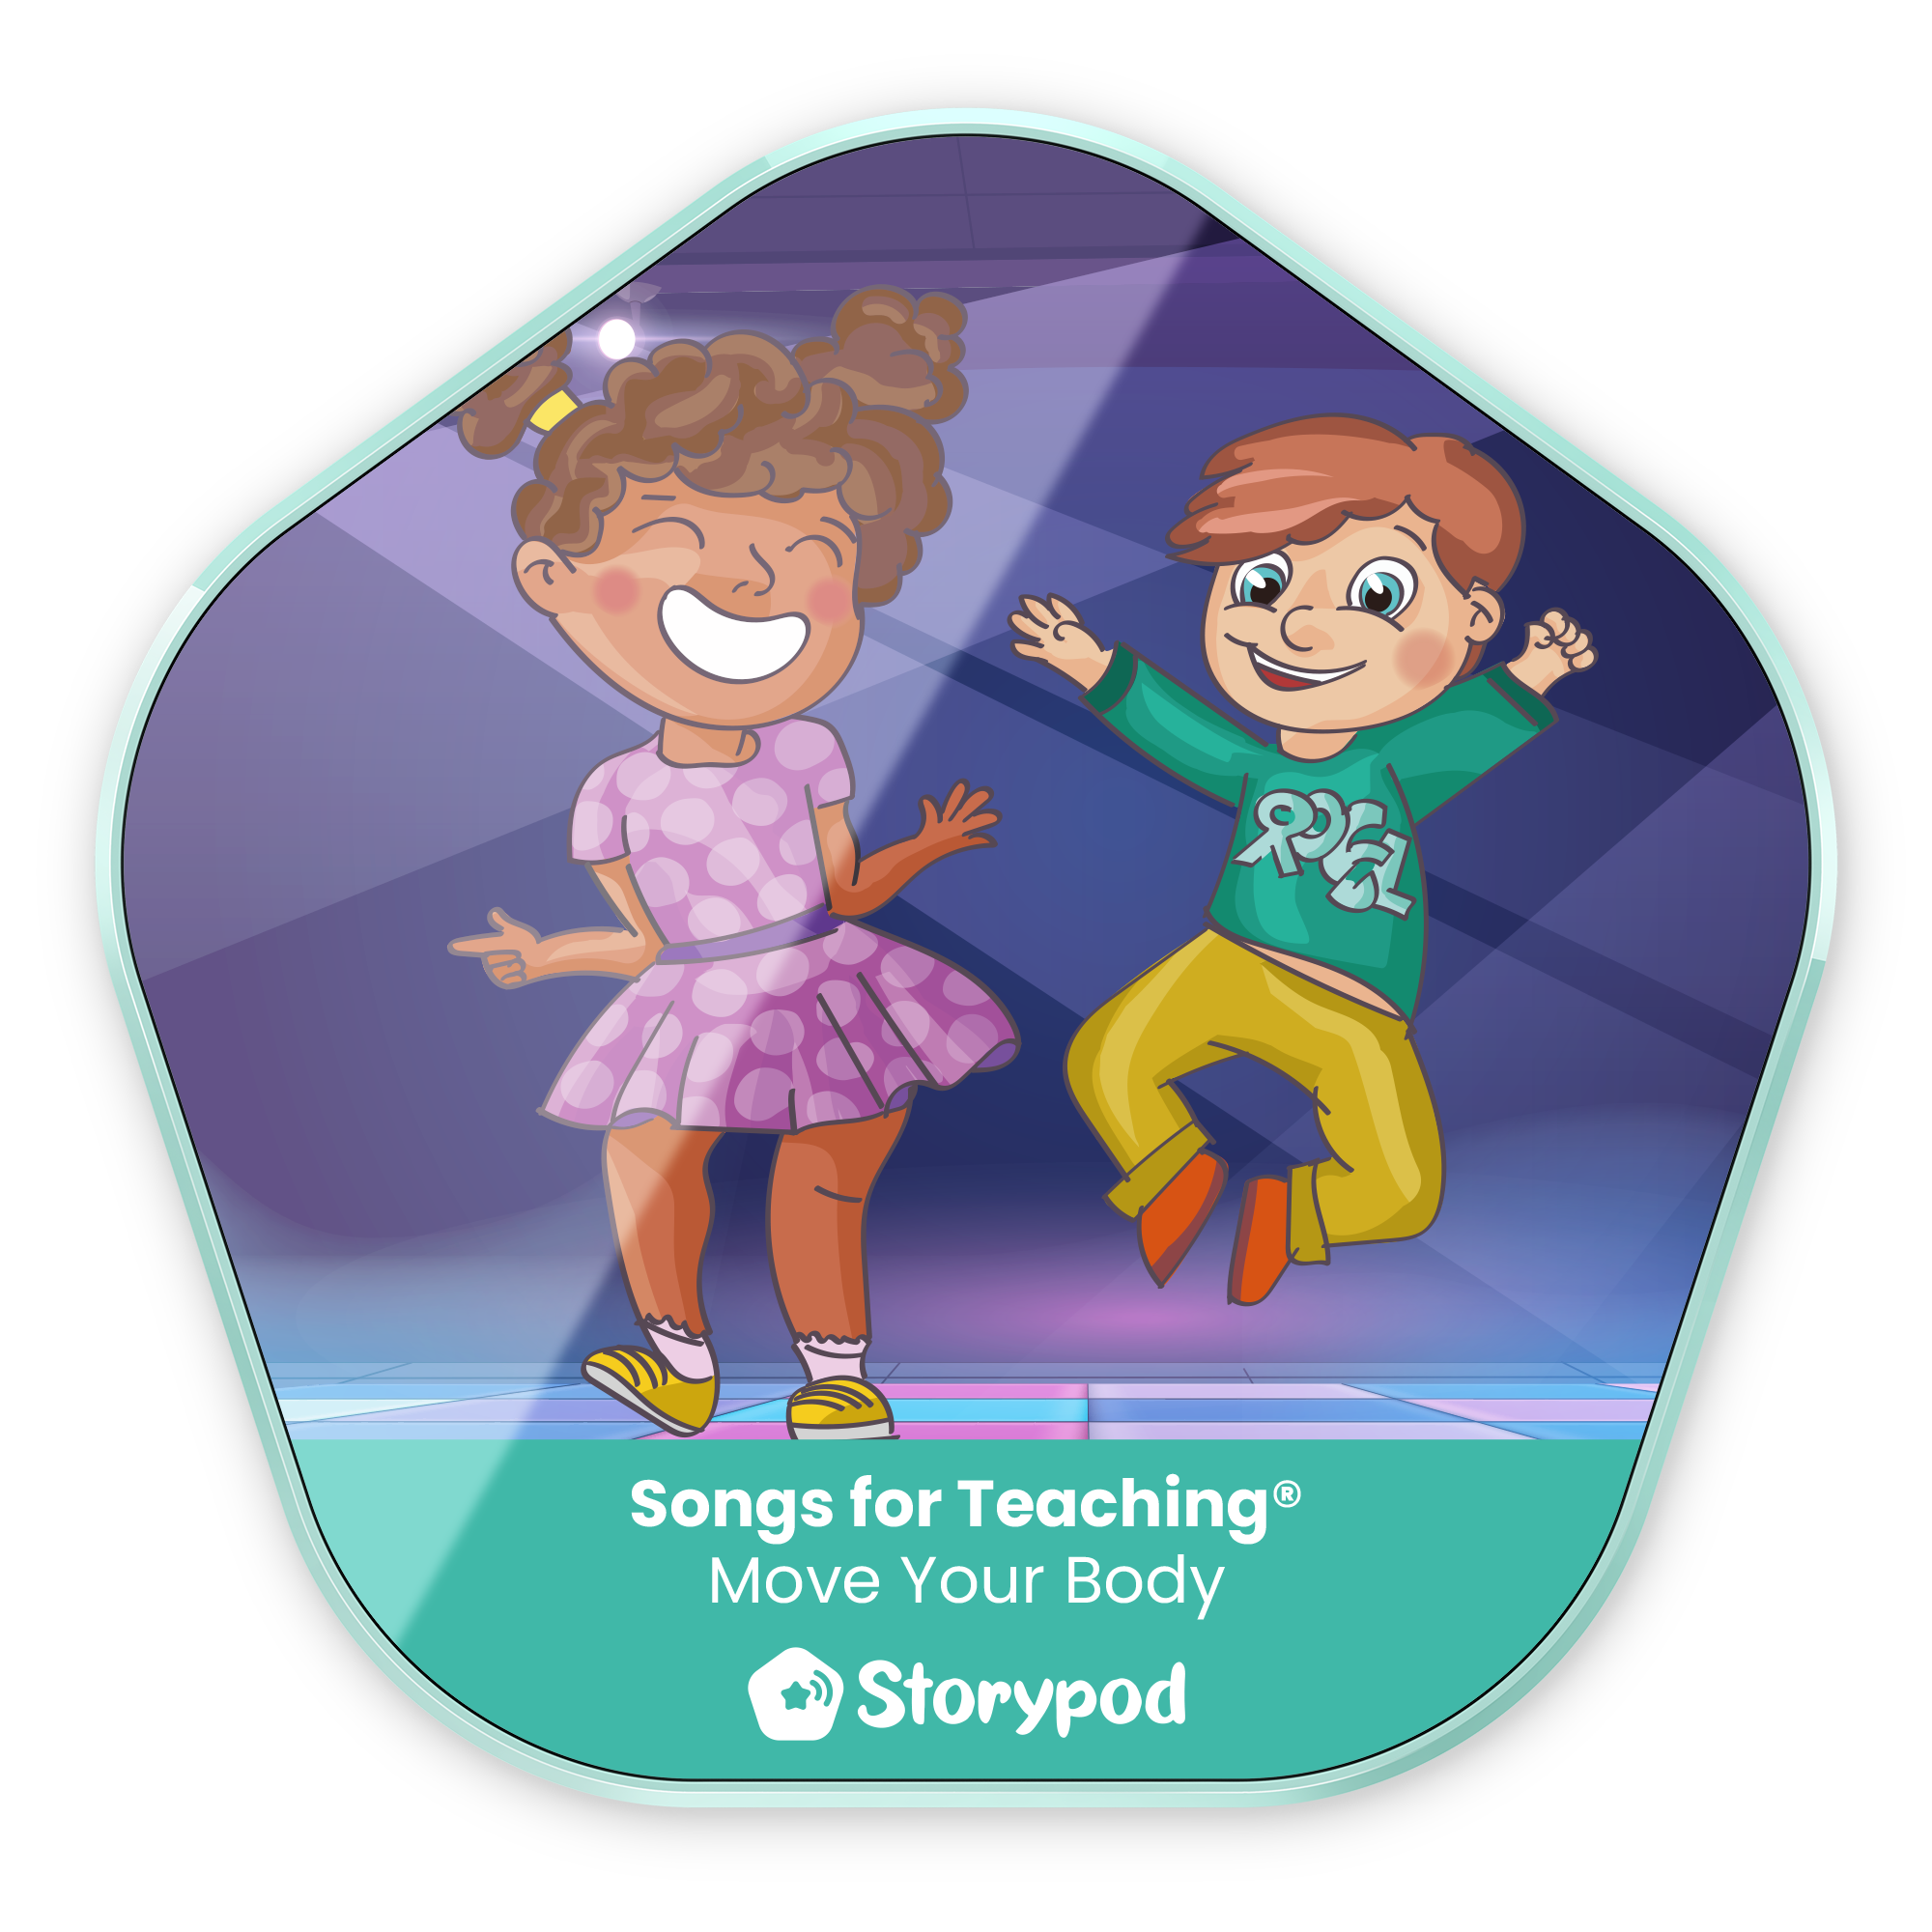 Songs for Teaching: Move Your Body